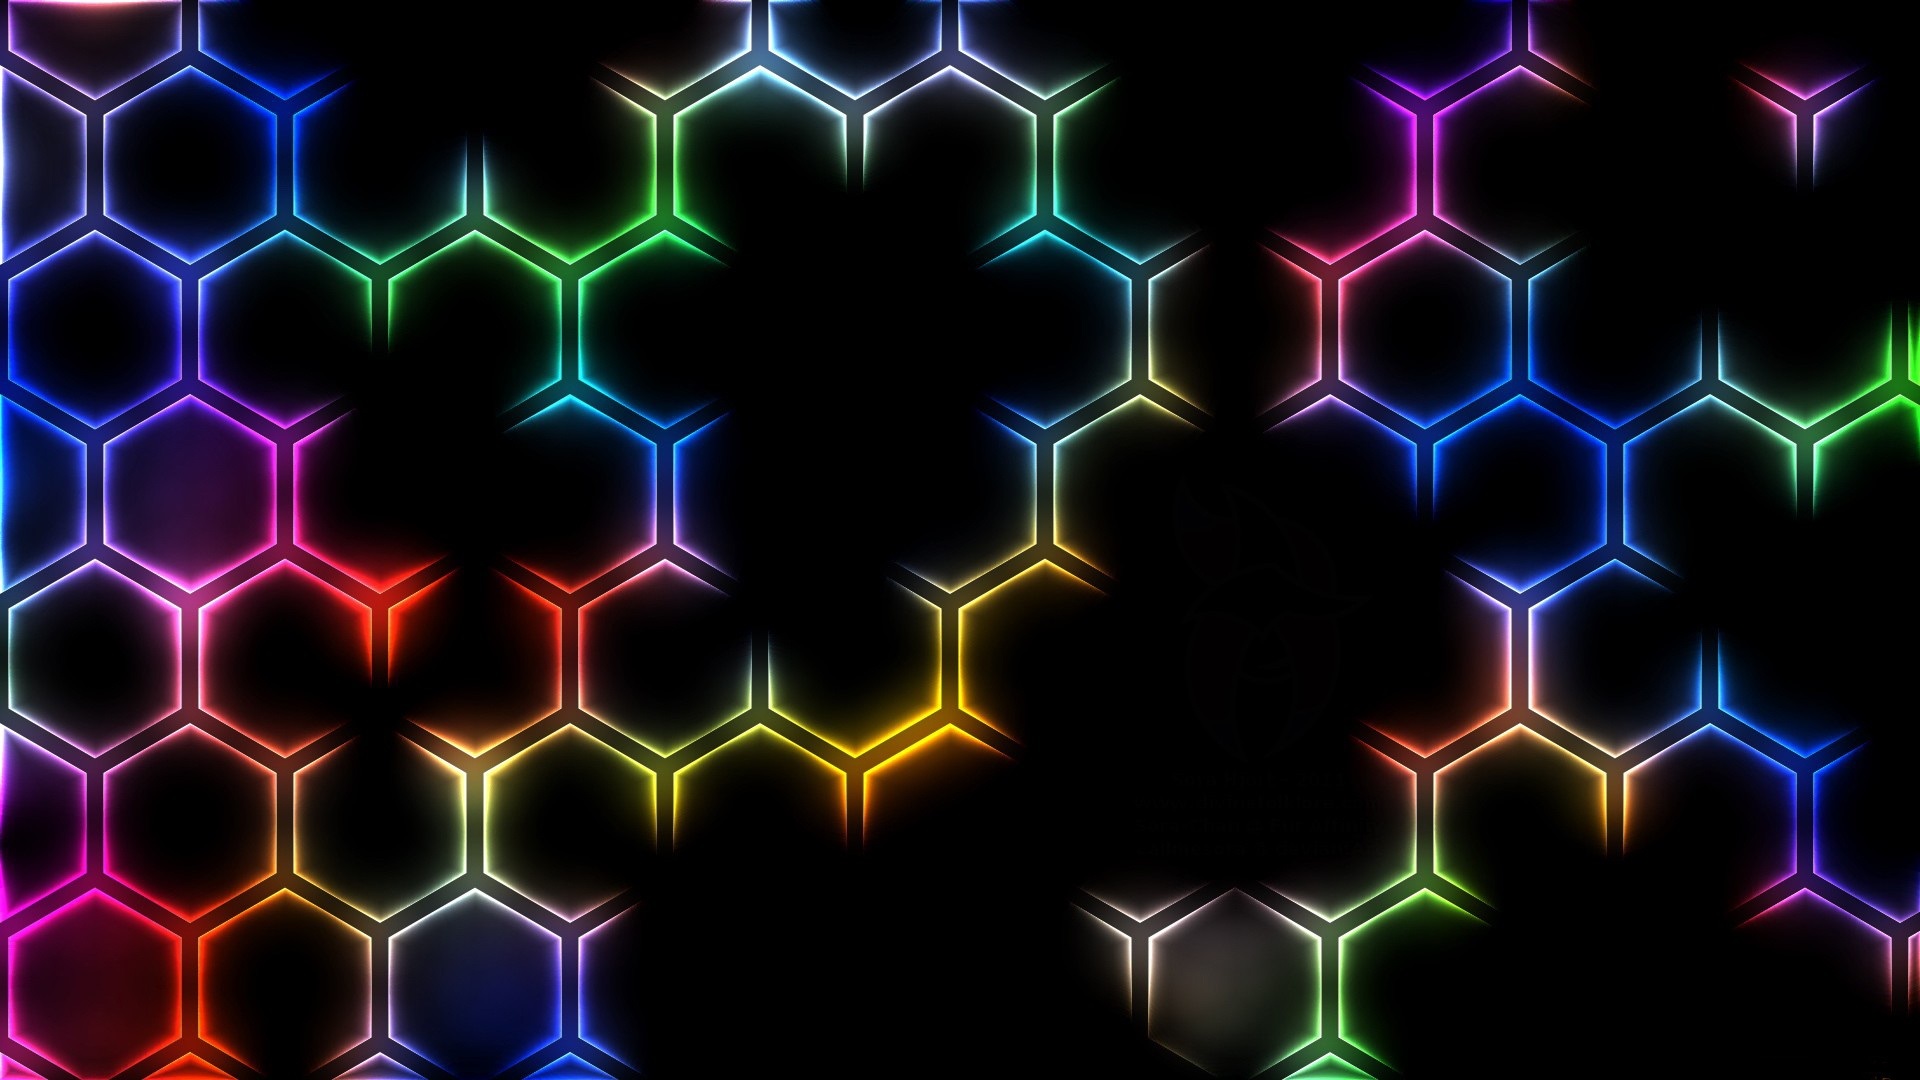 Wallpaper Abstract Pictures Honeycomb Colors Honeycomb Background Dark Neon Hd Wallpaper Backgrounds Download